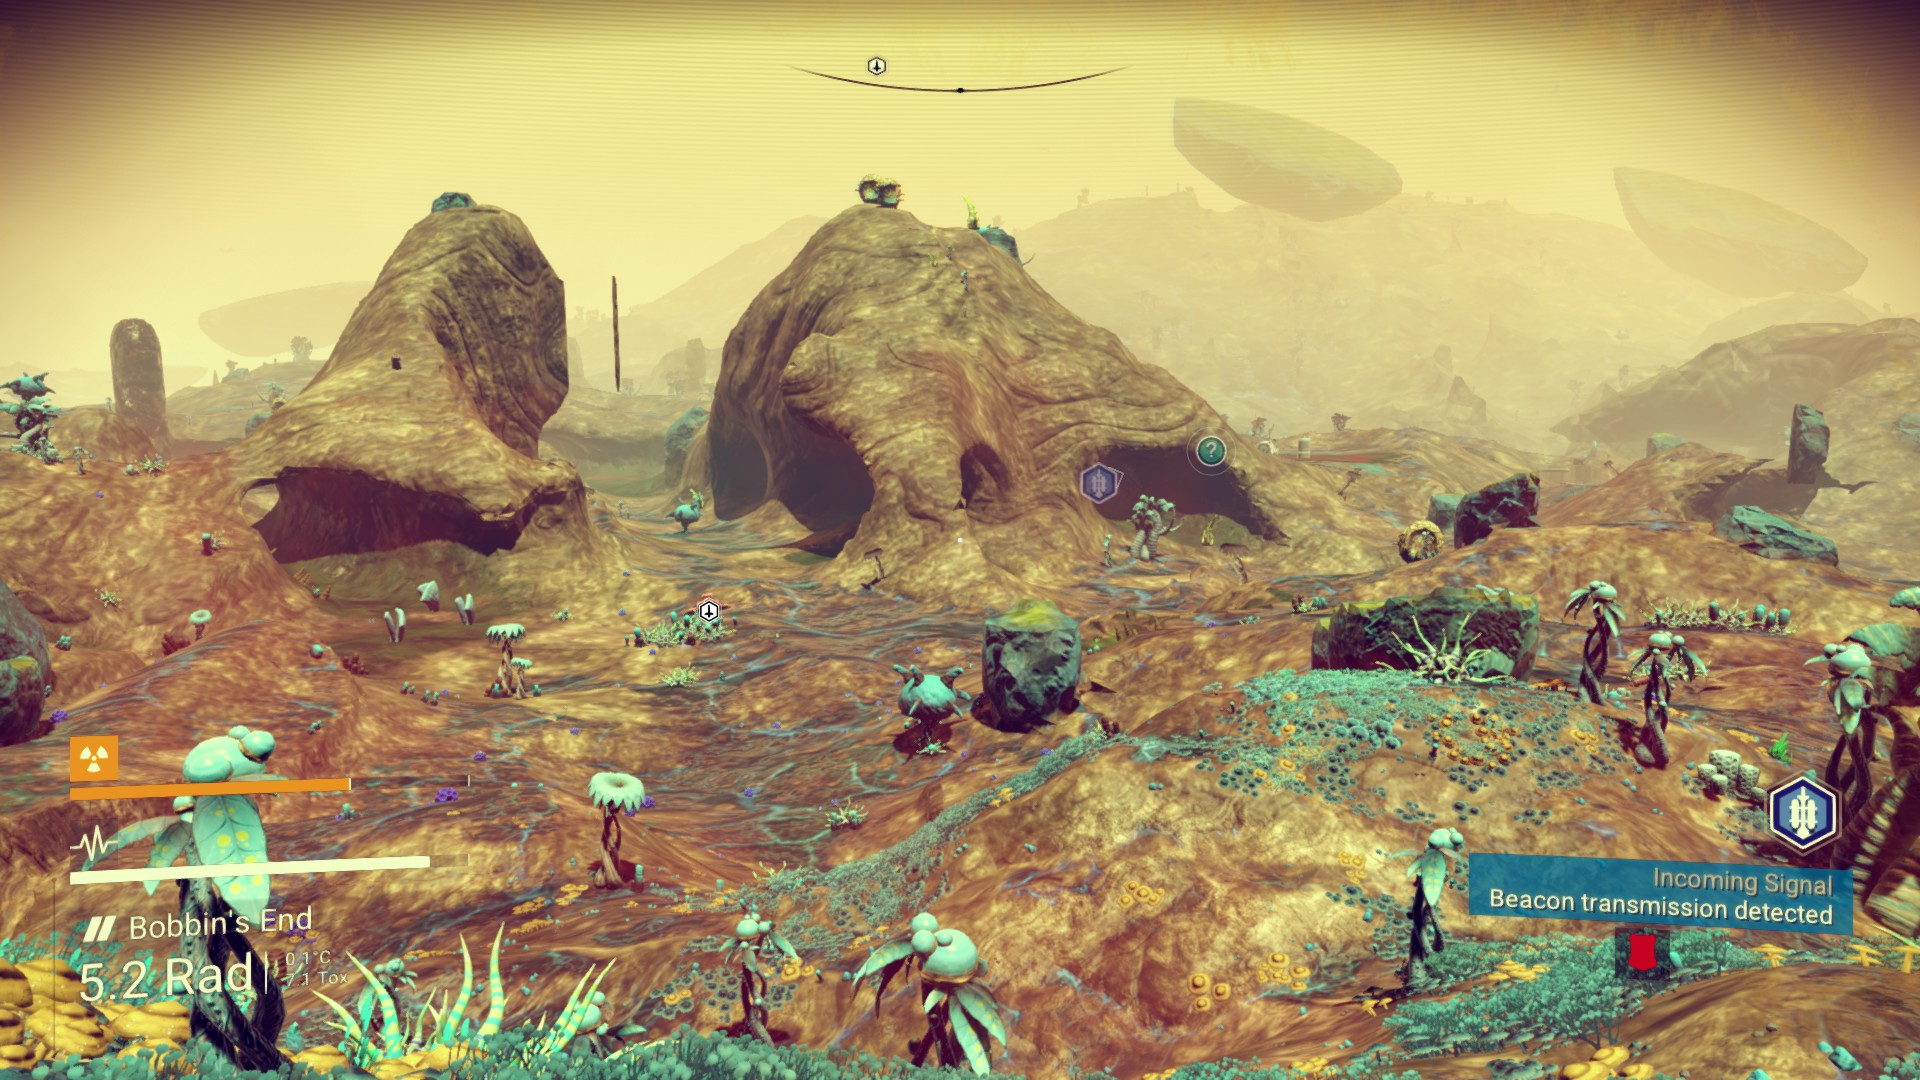 A screenshot from the launch version of No Man's Sky. It is a radioactive planet, an assortment of rocks and veins cover the landscape. It is not pleasing to the eye.